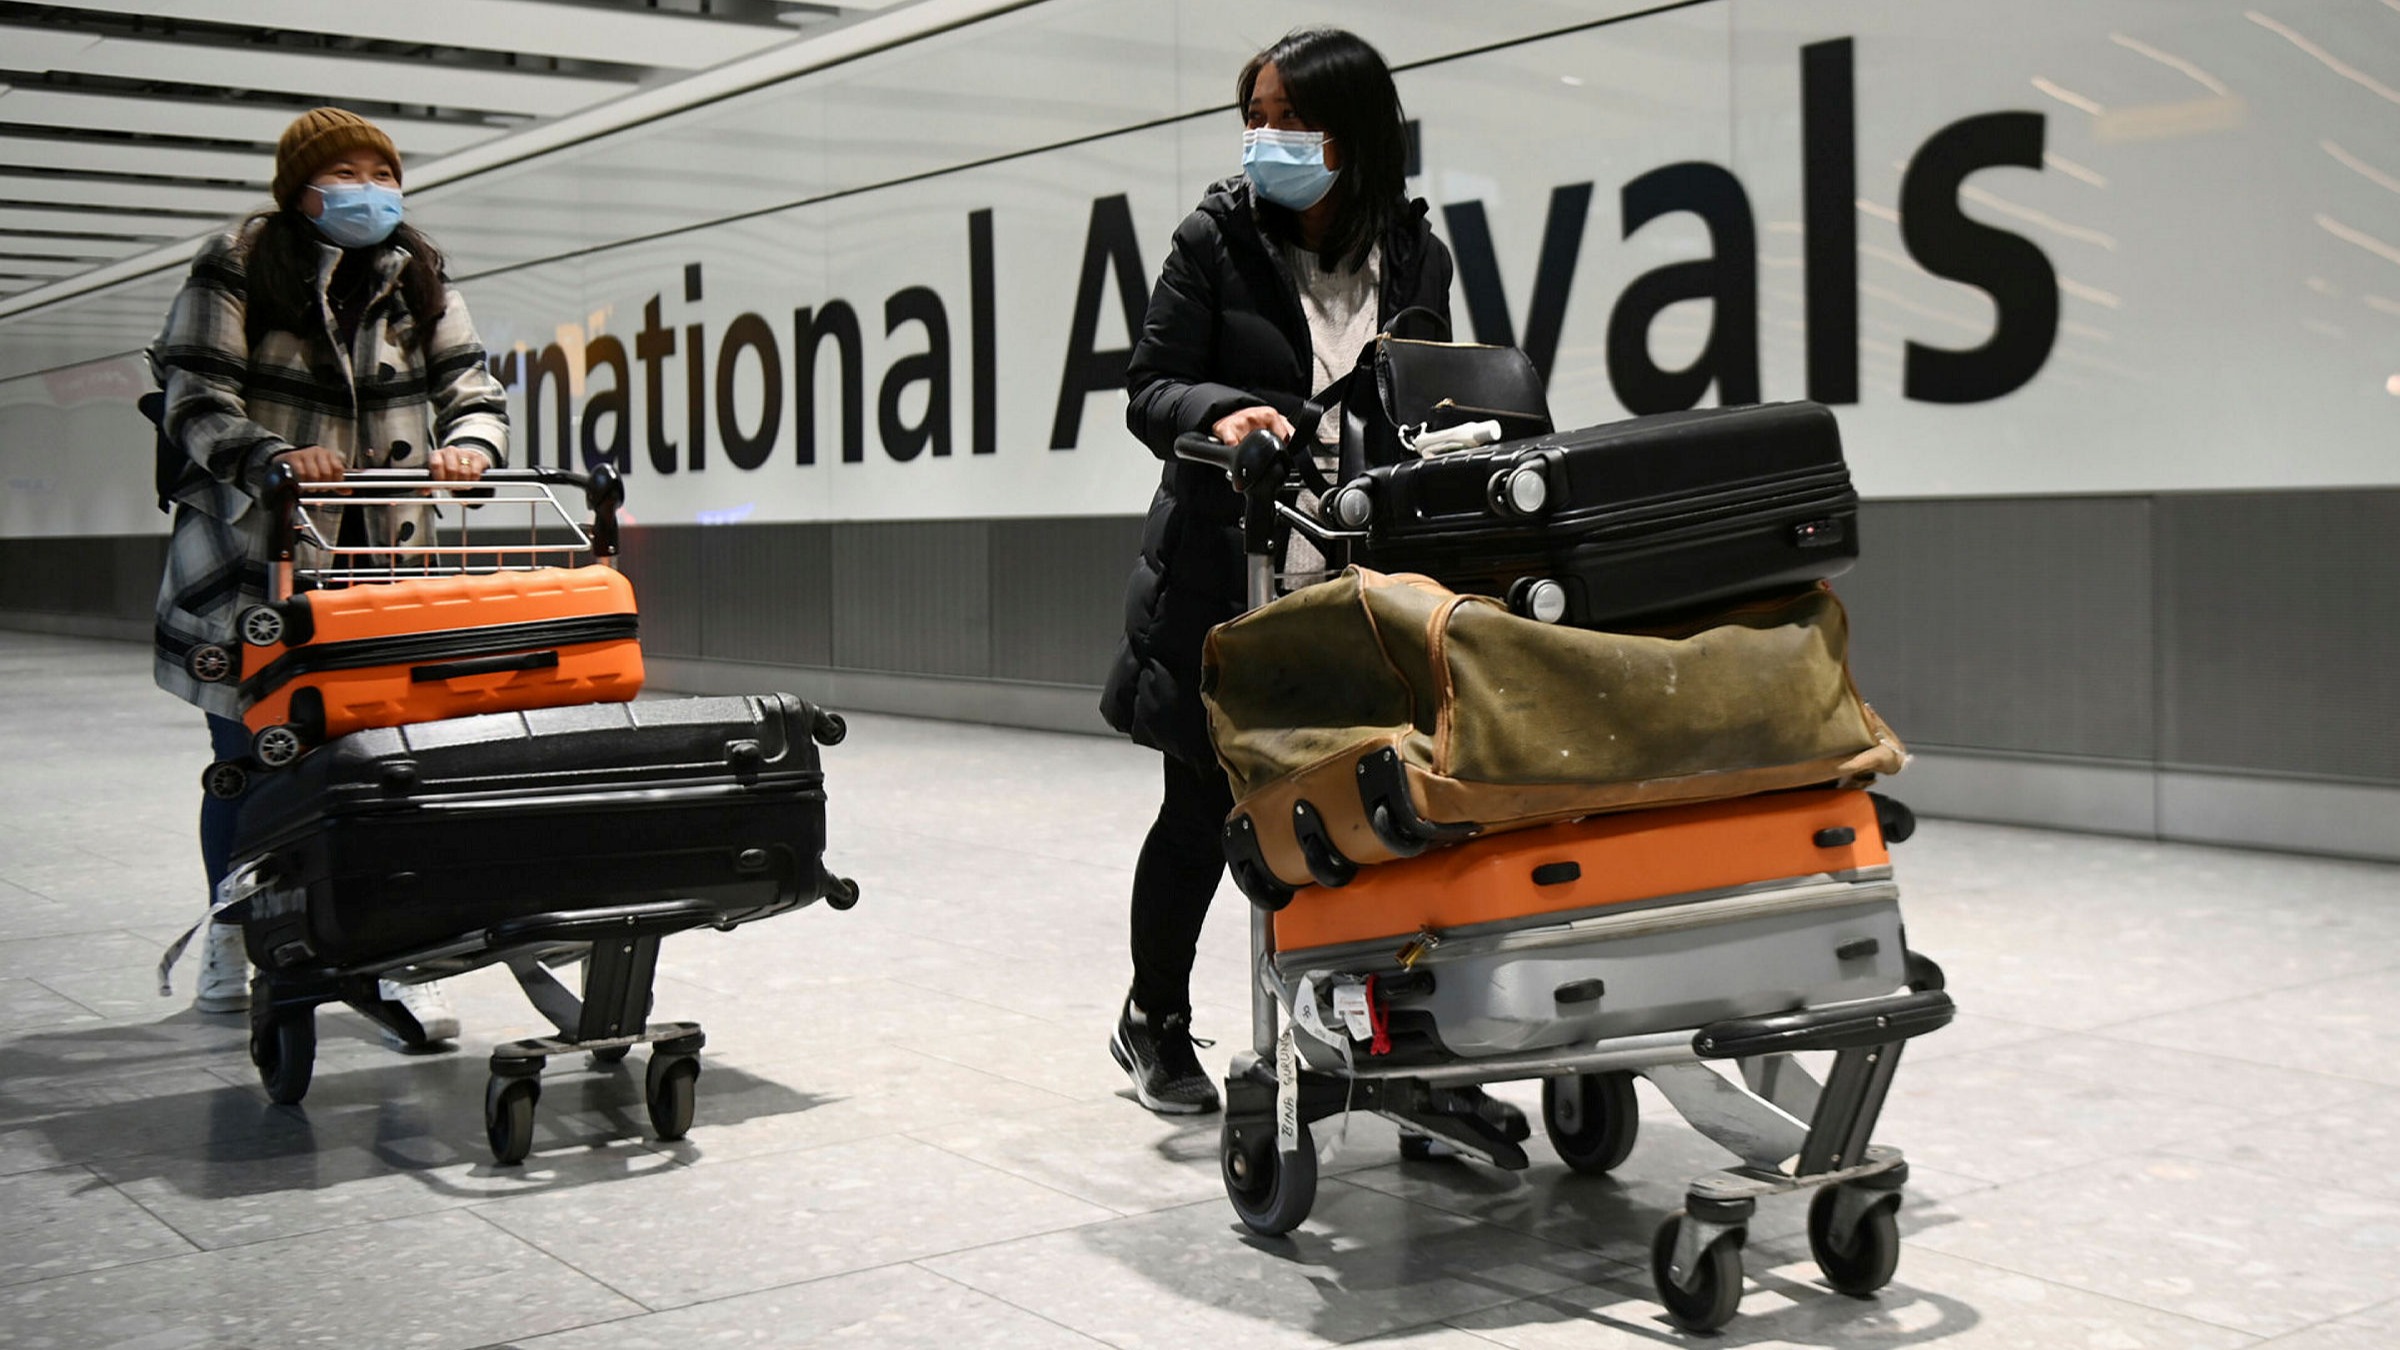 All UK Arrivals Face £10,000 Fine and 10-Year Prison Sentences